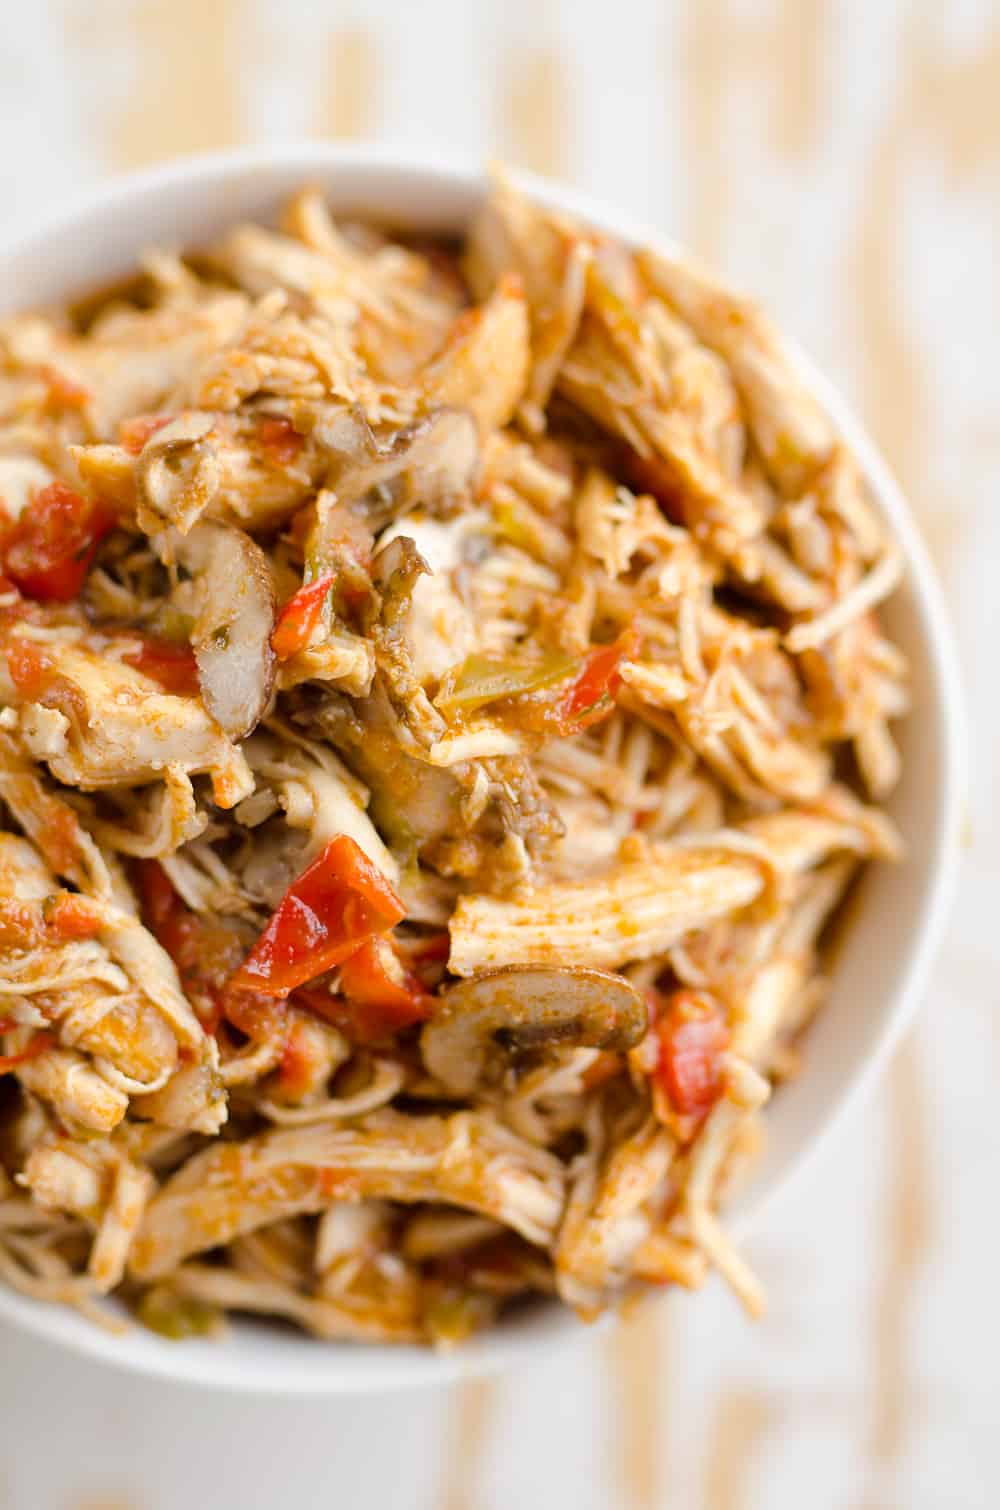 10 Healthy Chicken Recipes In A Pressure Cooker Or Crock Pot